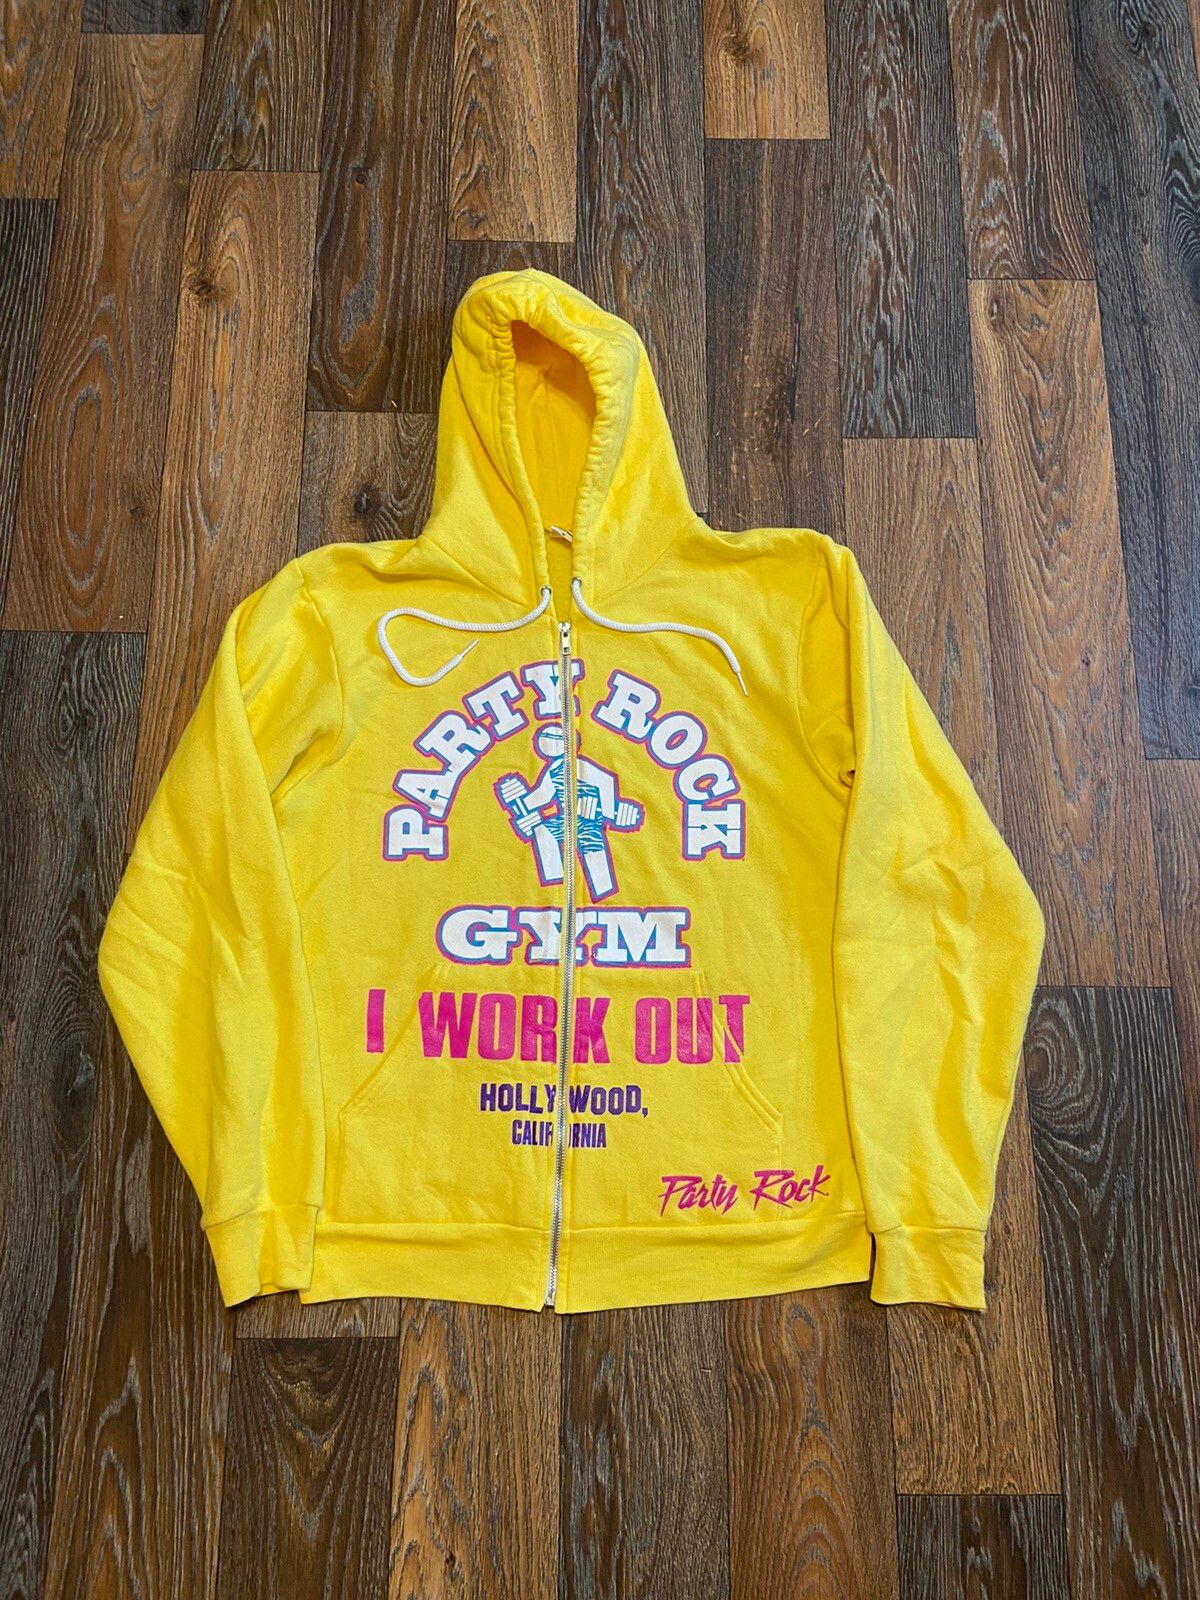 Hype CRAZY RARE Y2K LMFAO “Party Rock Anthem” Graphic Zip Hoodie Size US M / EU 48-50 / 2 - 1 Preview